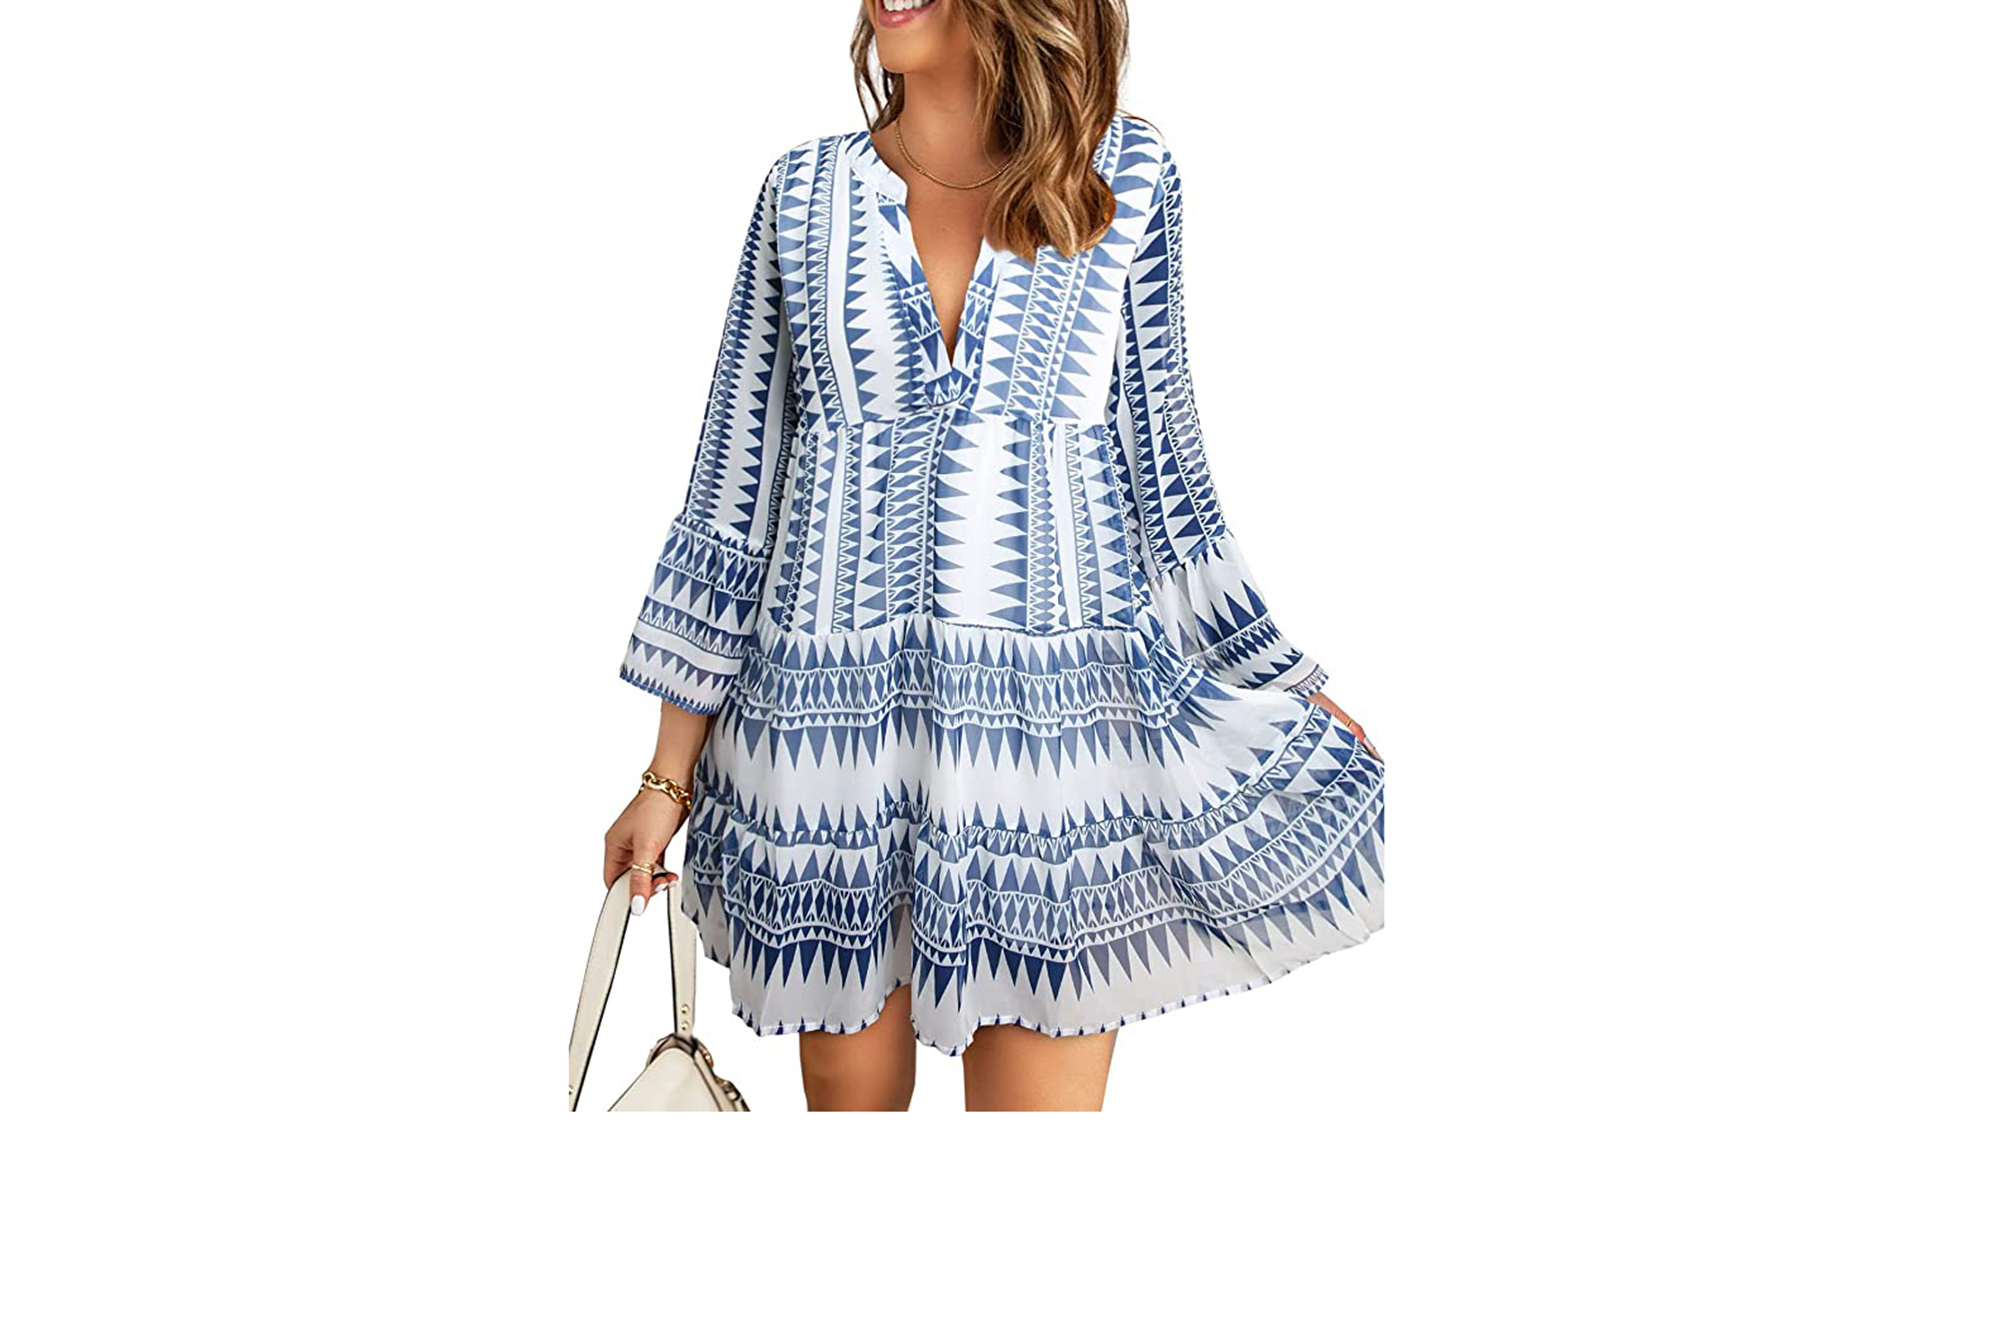 Shop This Breezy Boho Summer Dress — On Sale Now for $29